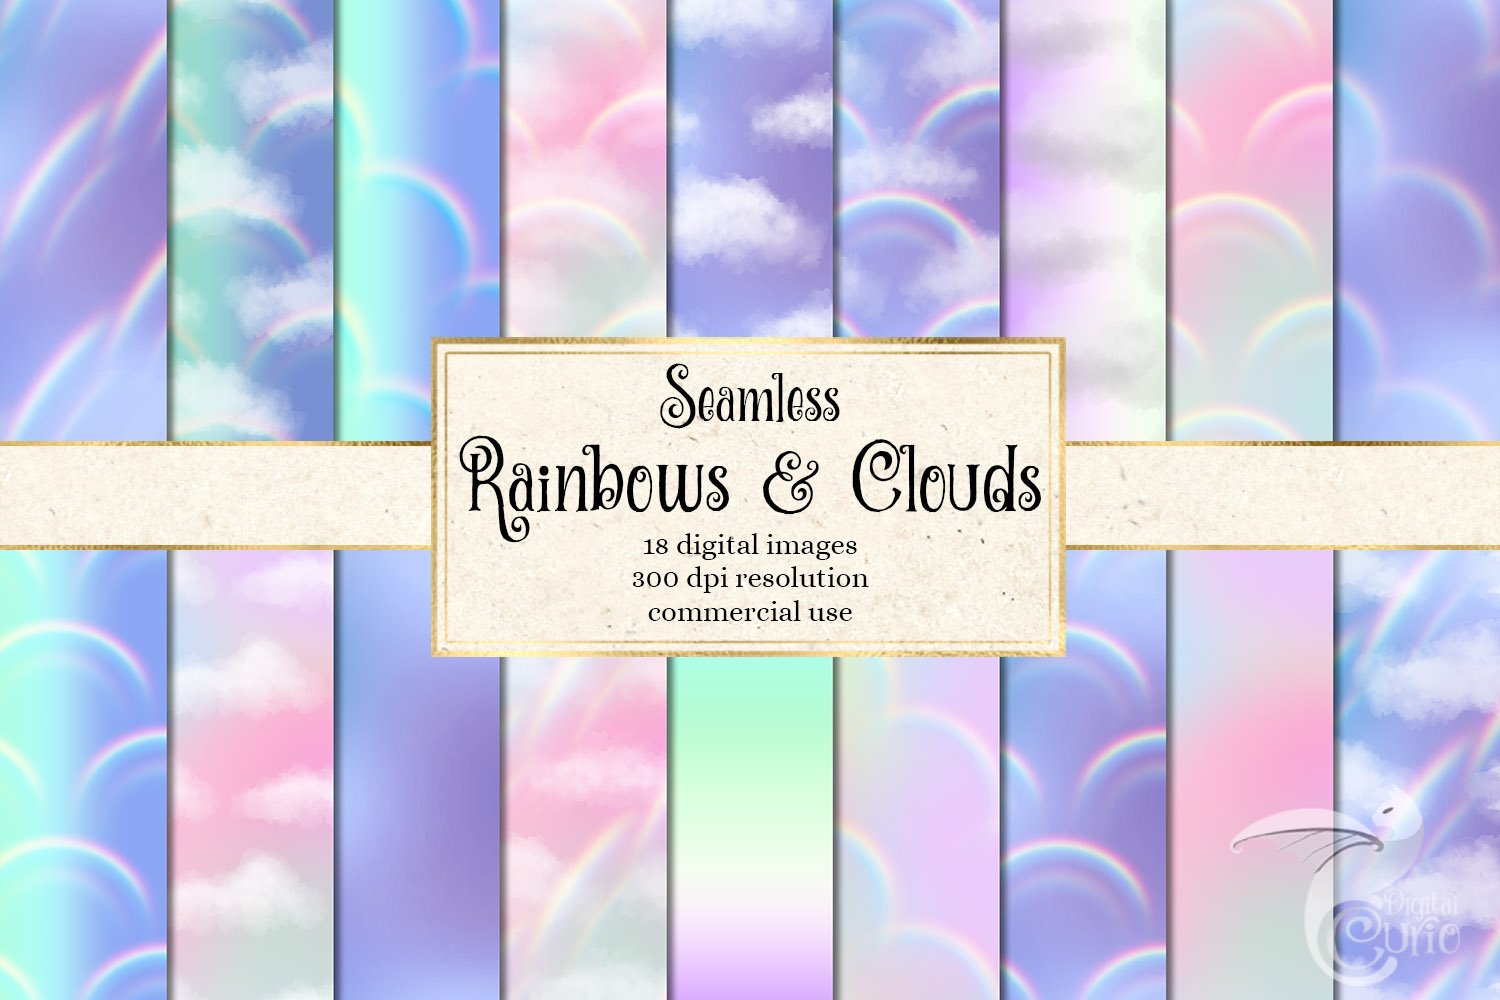 Rainbows & Clouds Digital Paper cover image.